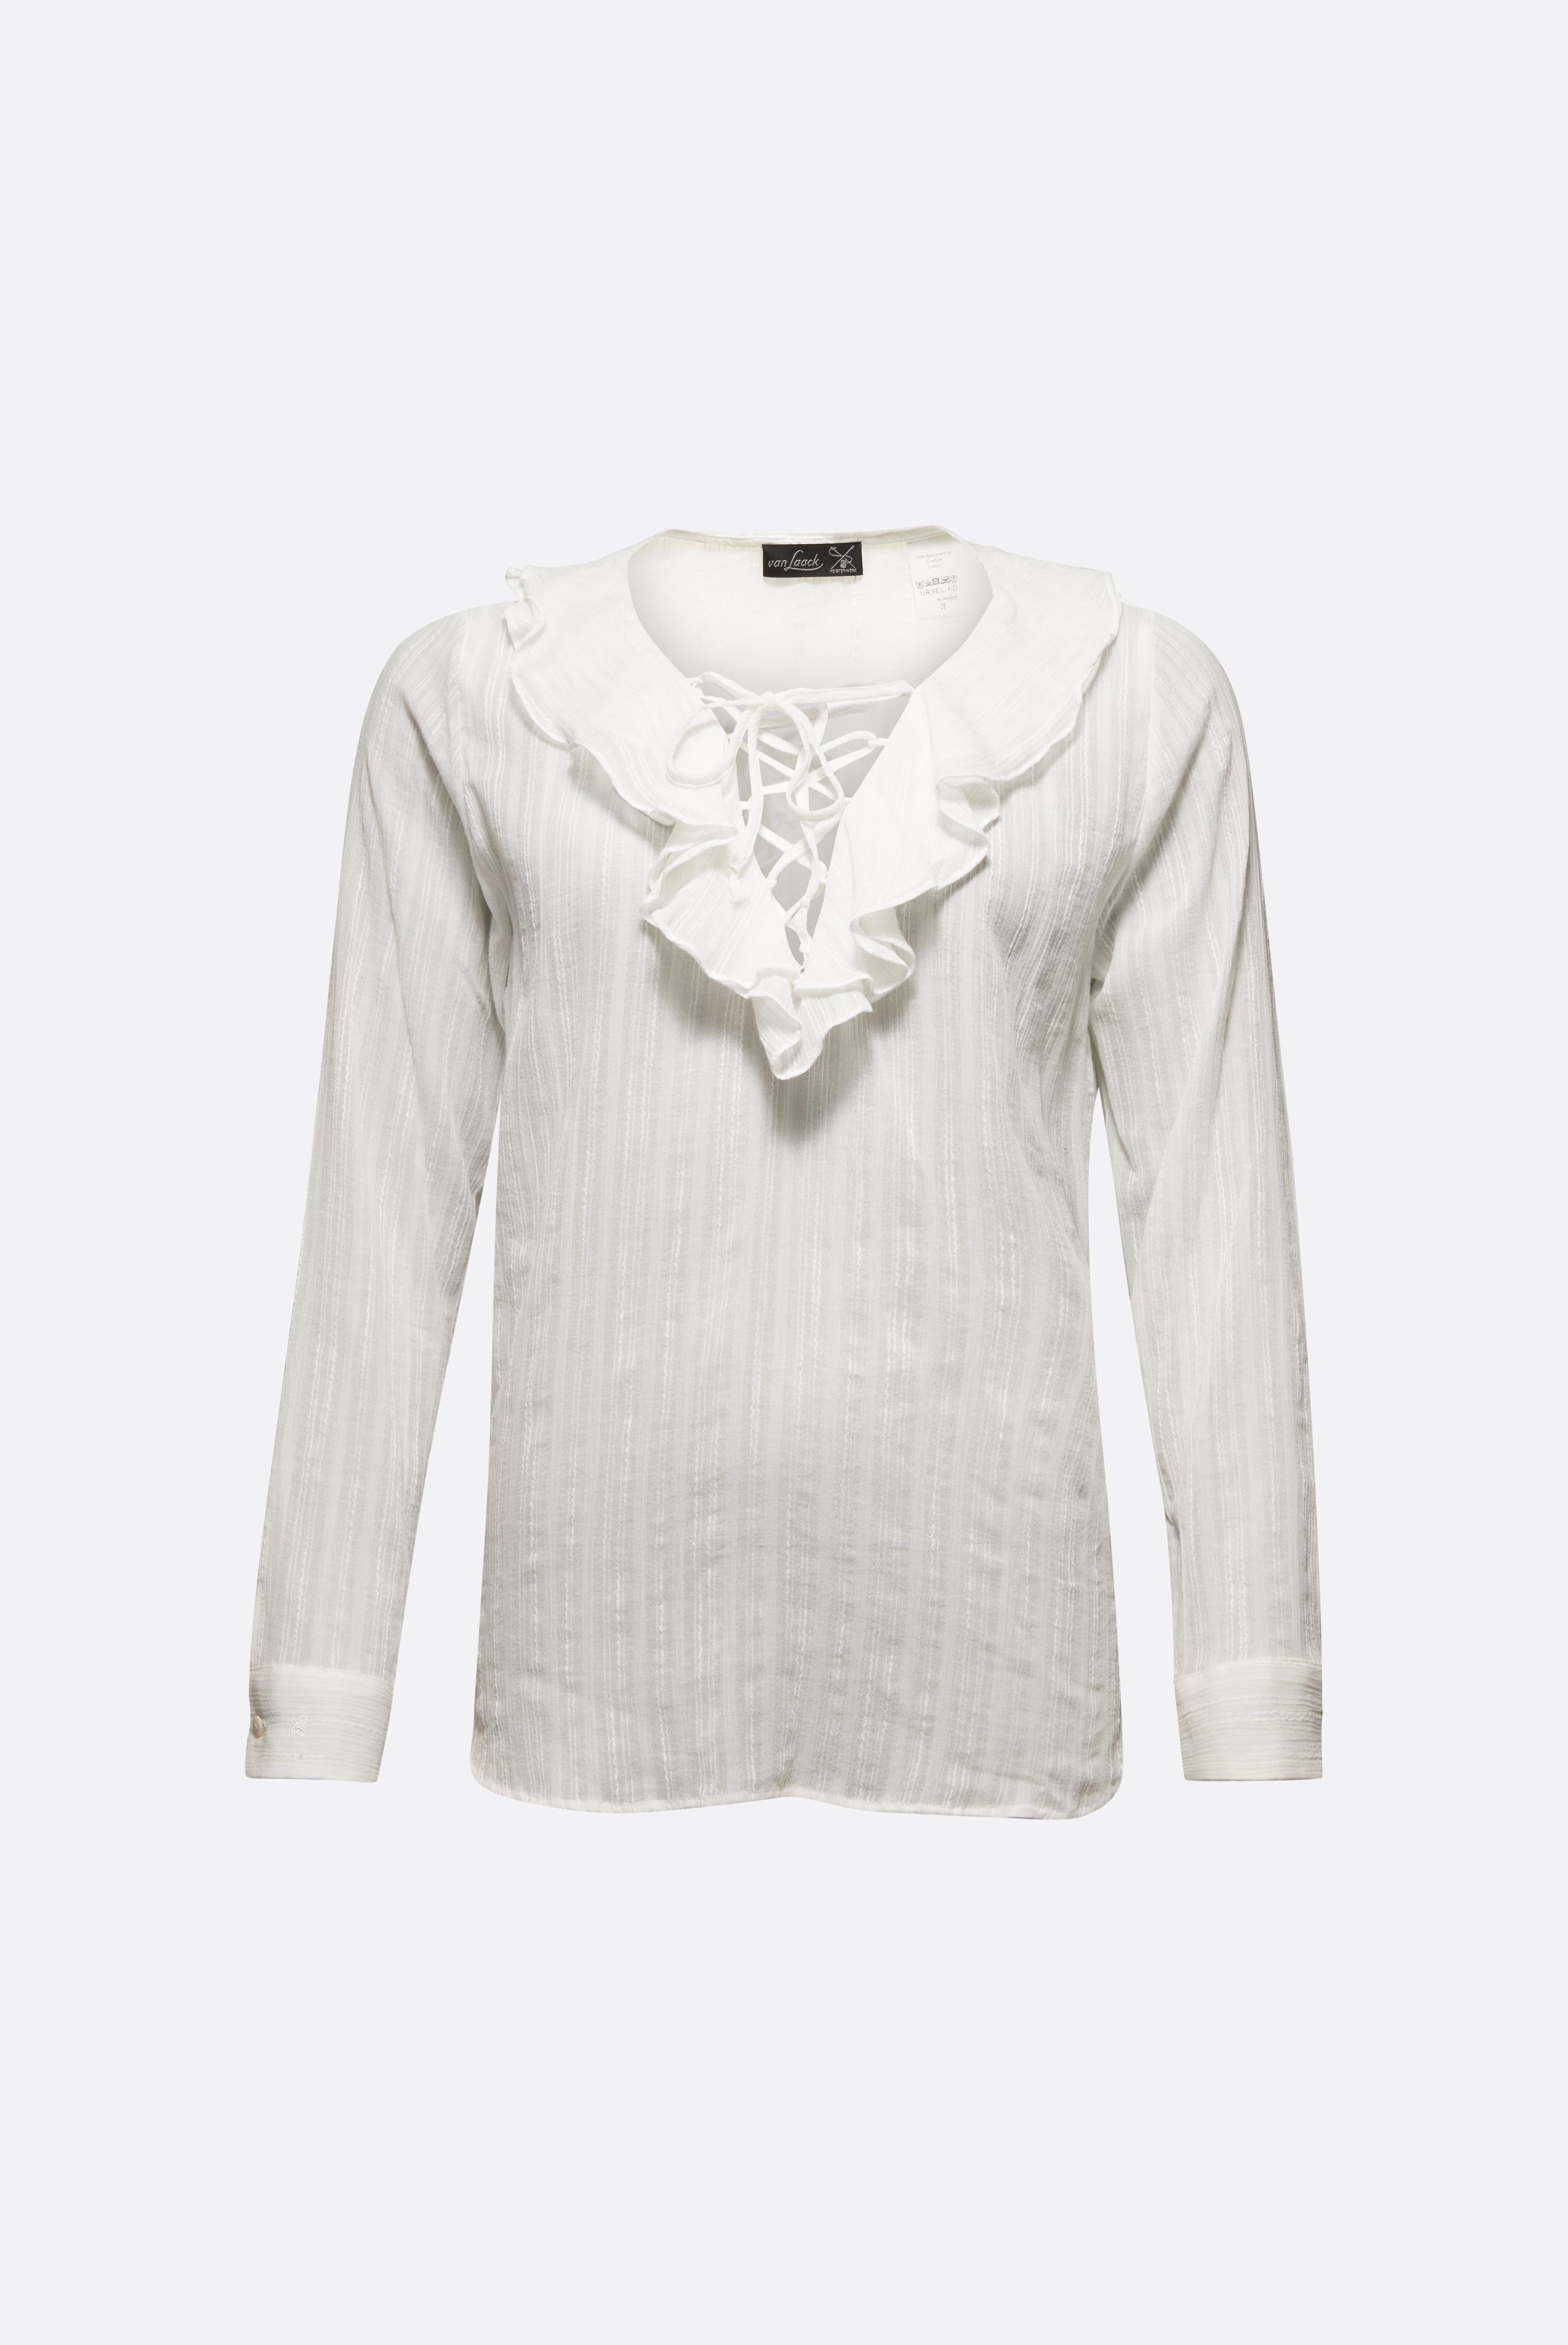 Casual Blouses+Jacquard blouse with ruffles at front+05.529J.56.151063.100.32